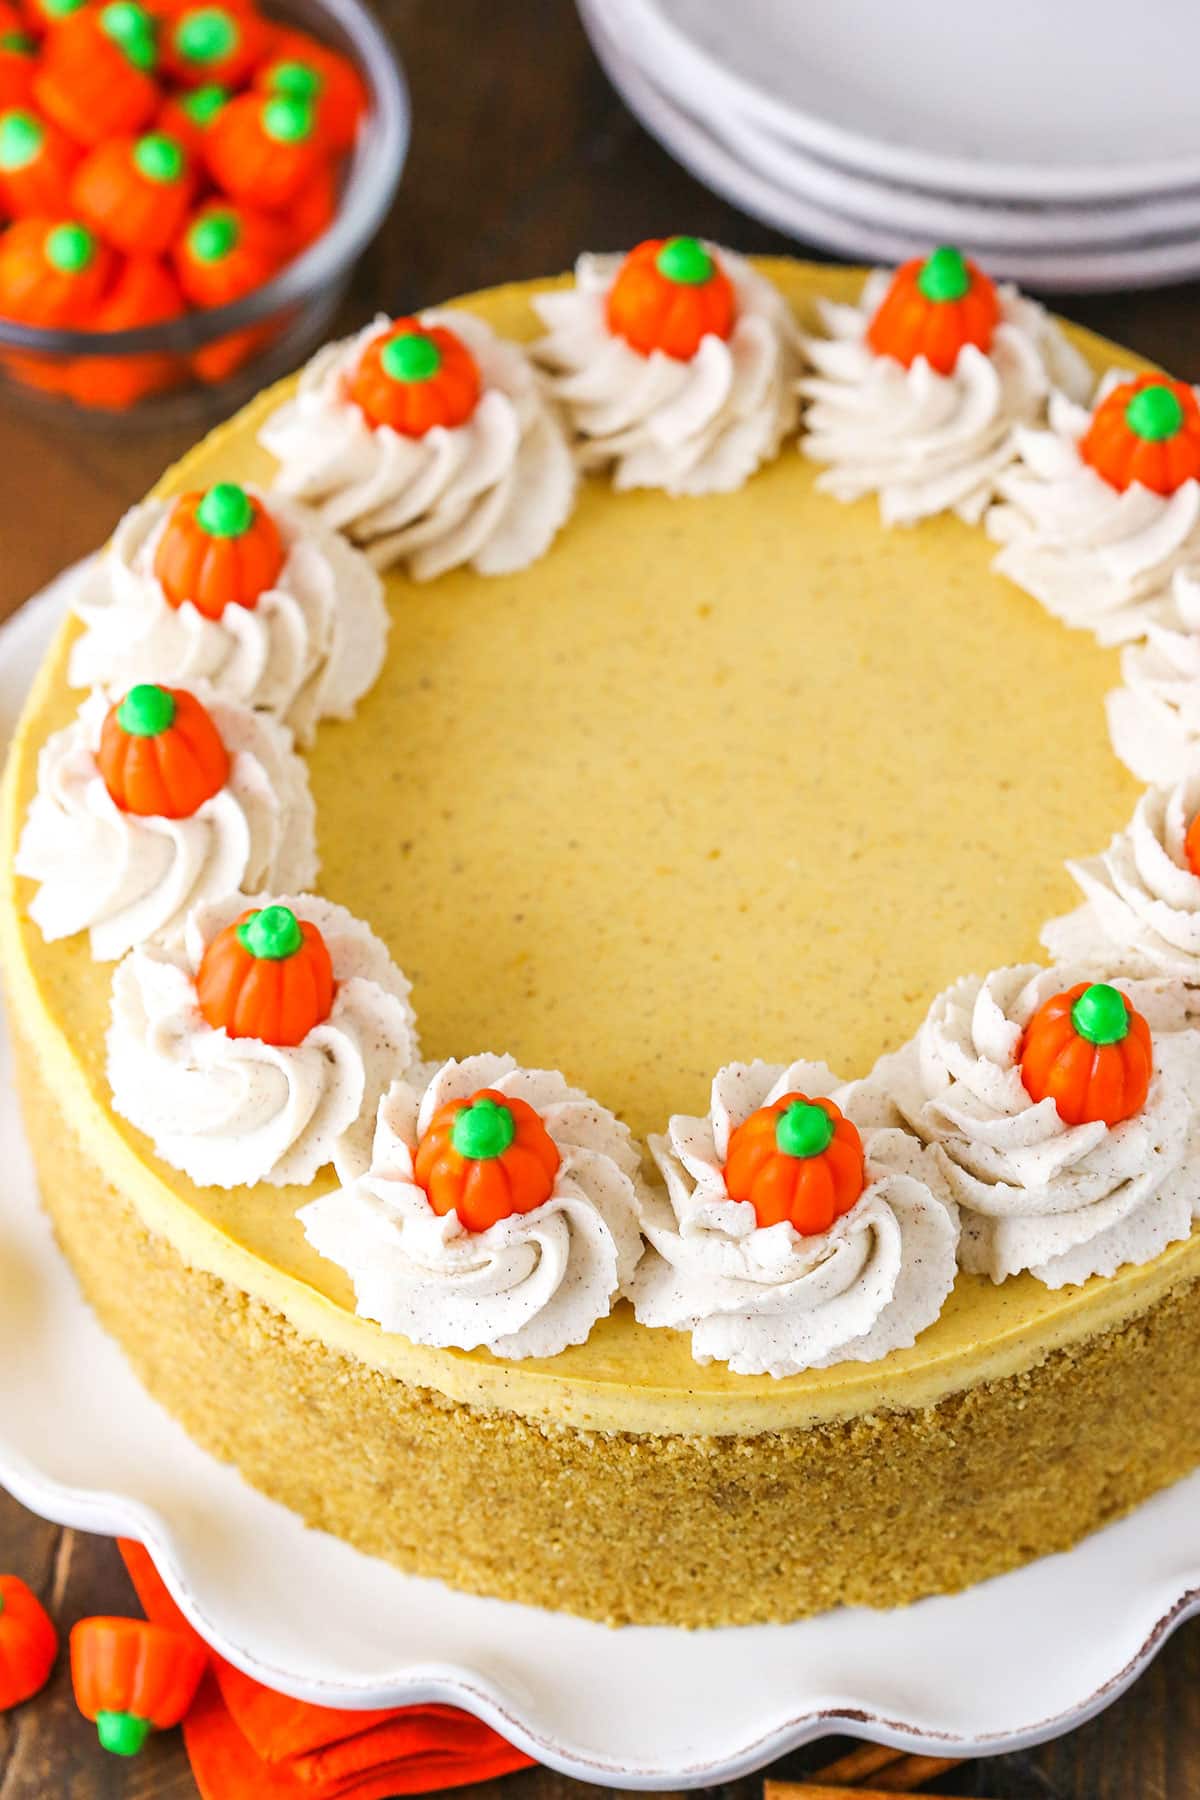 A Pumpkin Cheesecake with Swirls of Whipped Cream and Pumpkin Candies